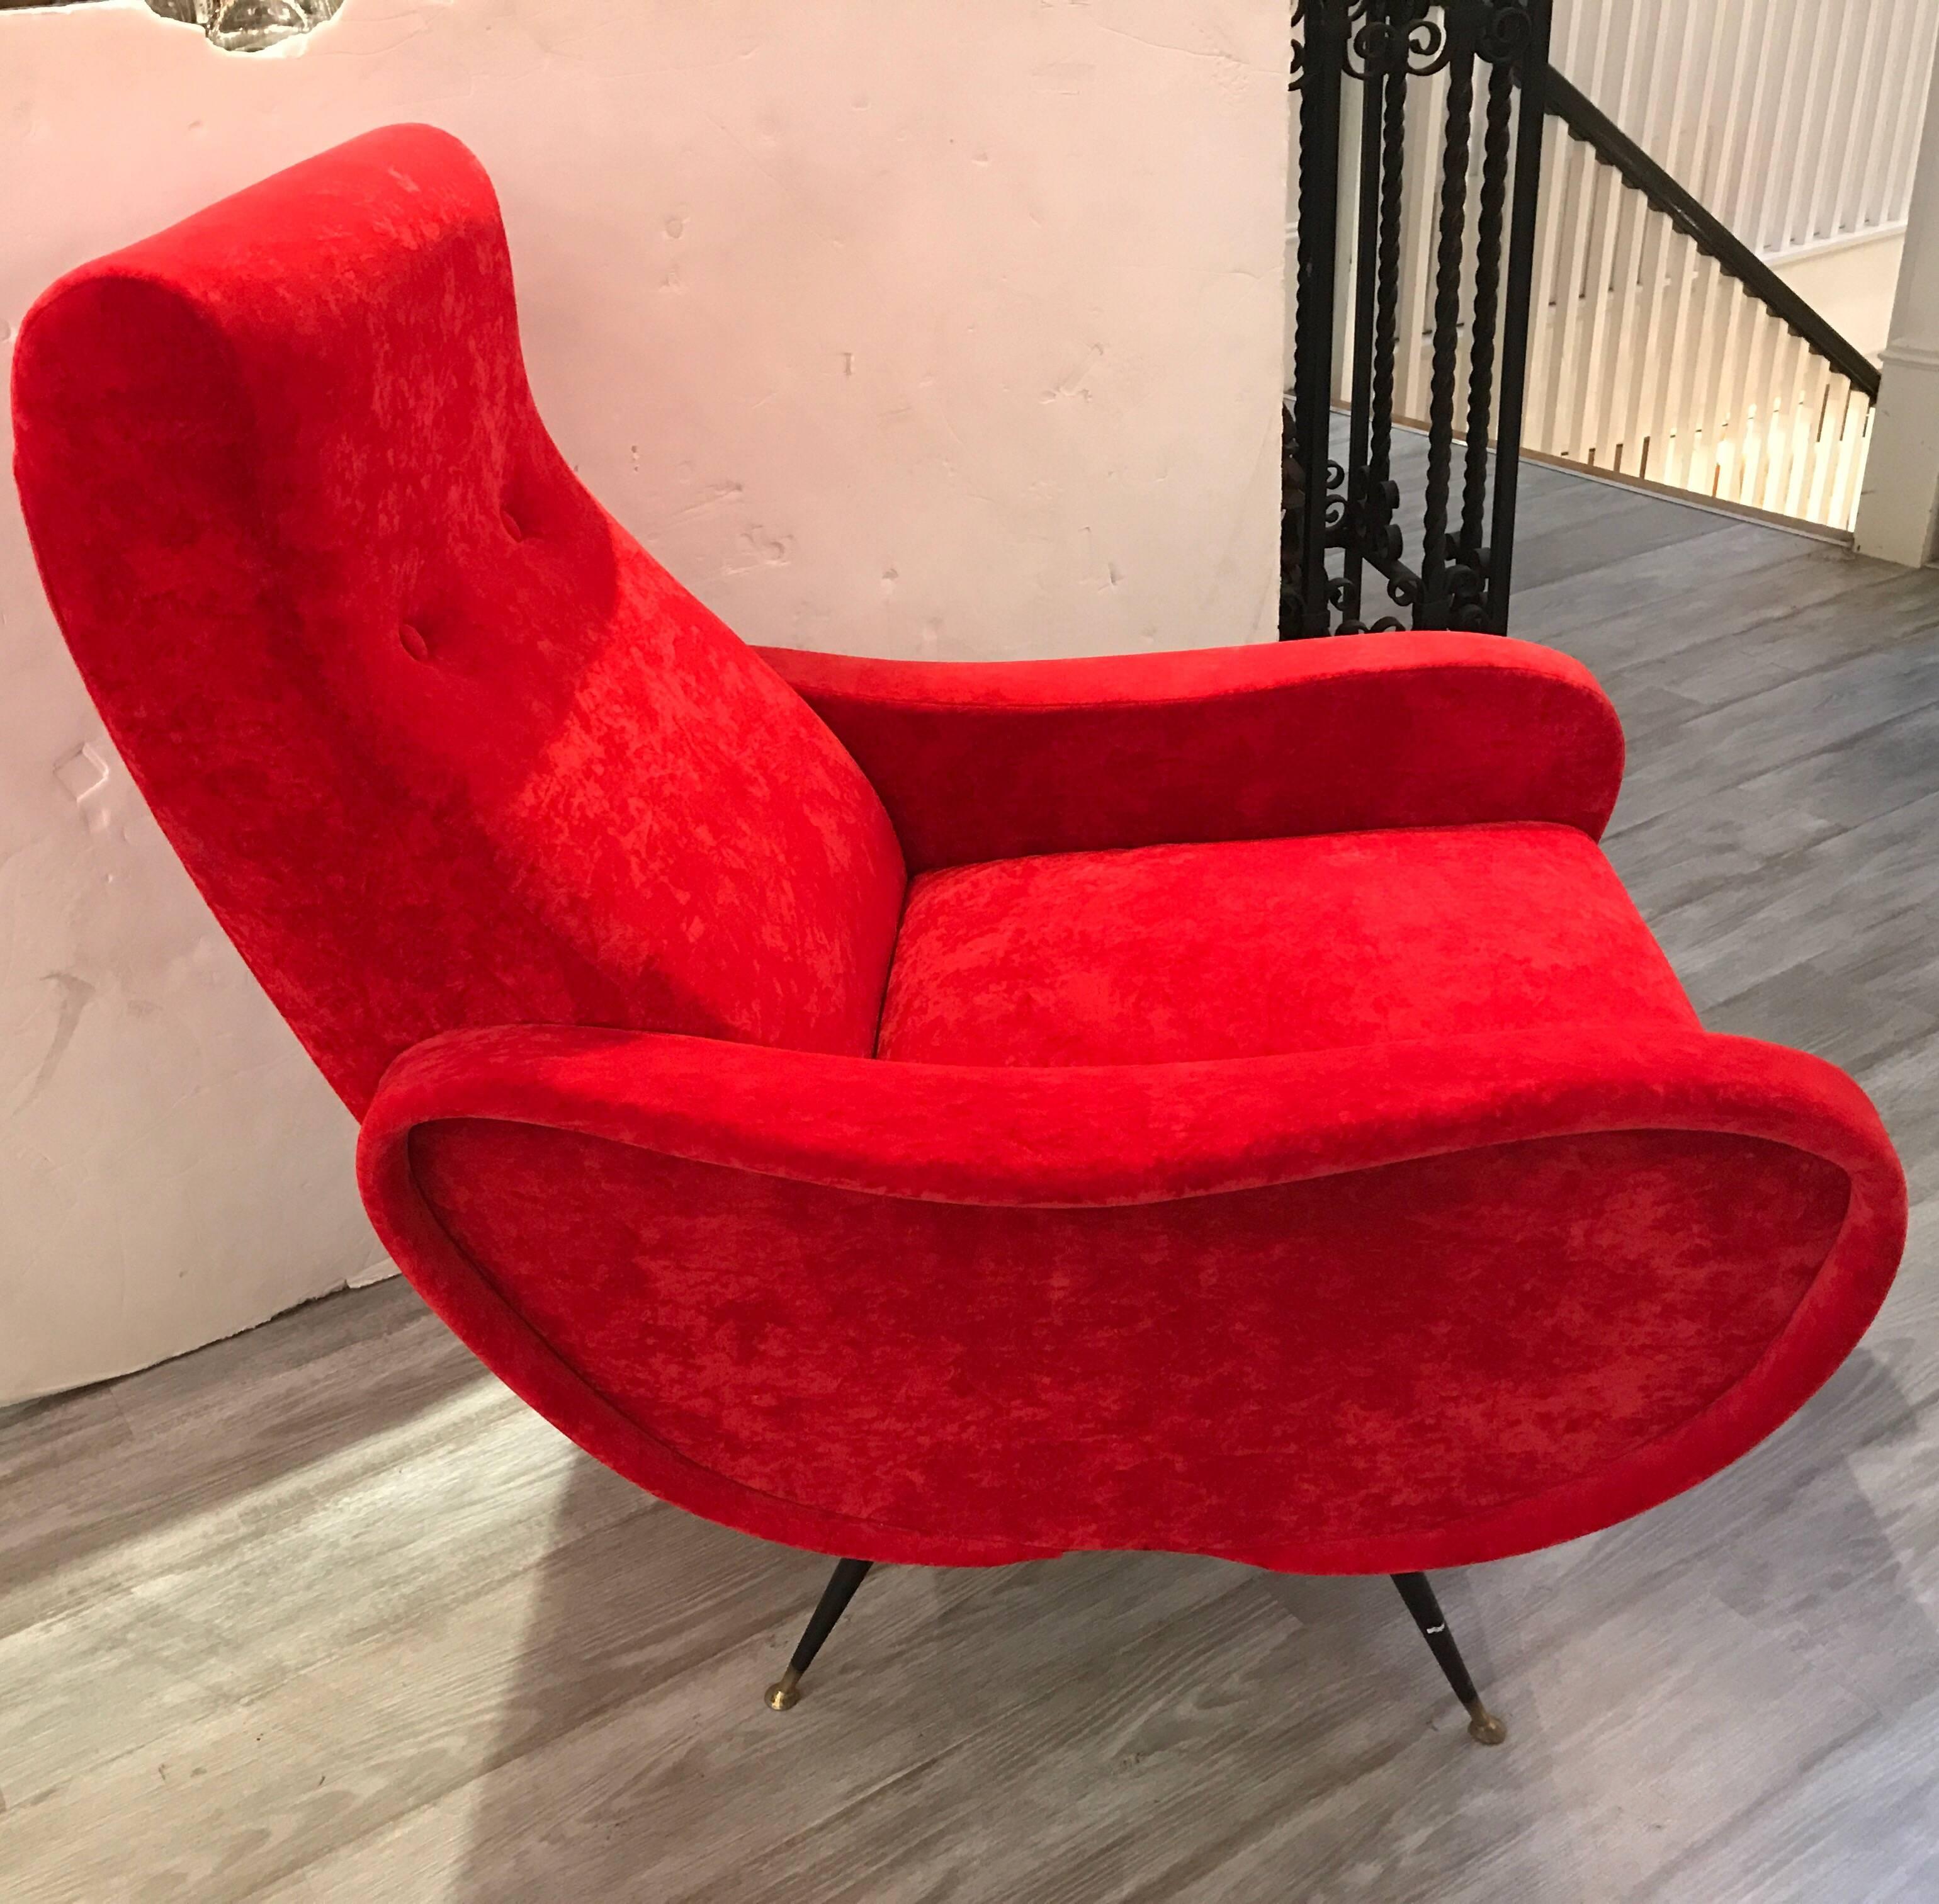 This beautiful sculpted pair of 1950s Italian modern armchairs feature tapered legs with brass tipped feet. The vibrant red velvet with two back buttons, the Silhouette is very curved and comfortable.